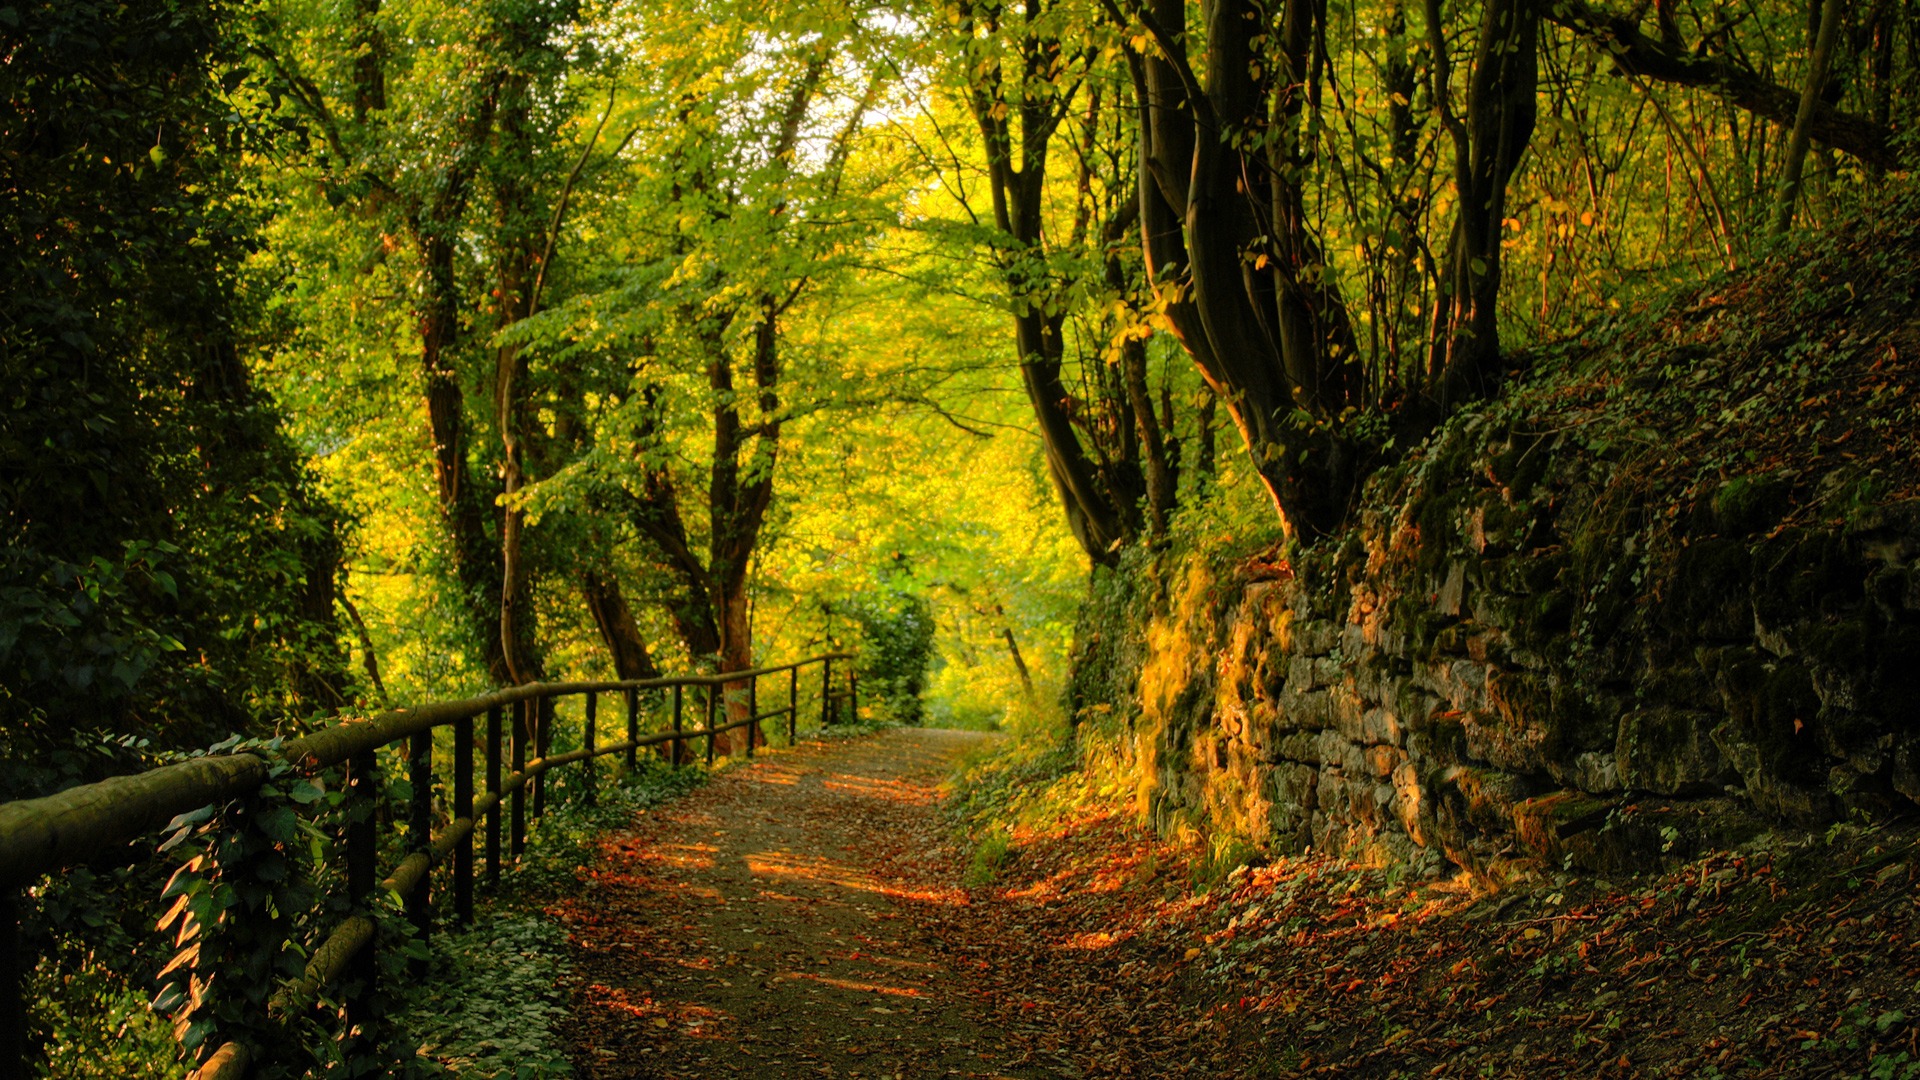 Nature's beauty captured in a tree-lined path - a scenic desktop wallpaper.